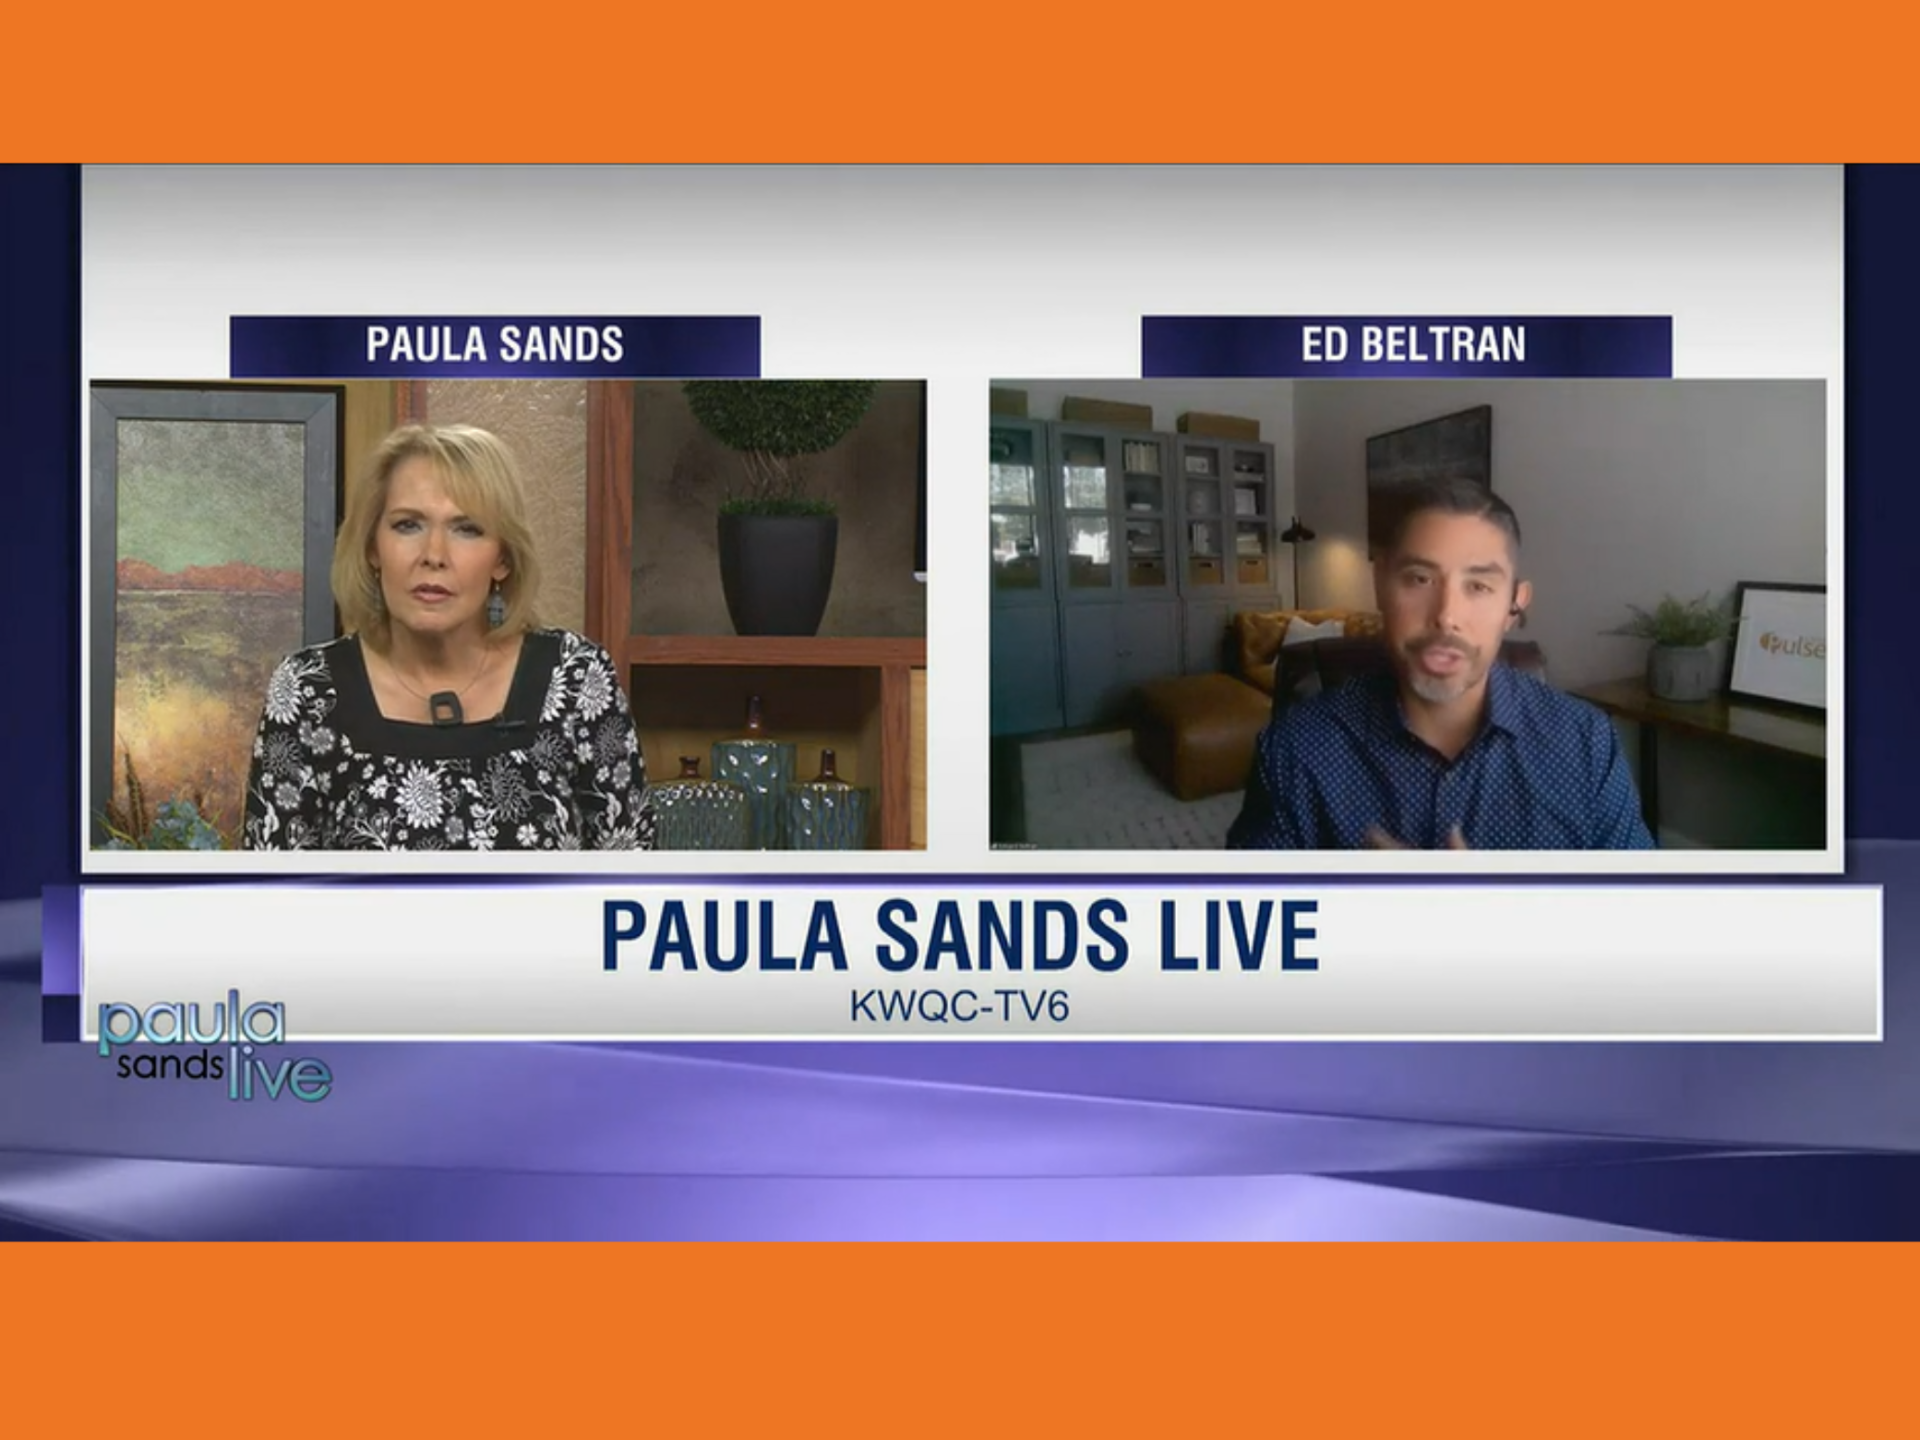 paula sands and edward j beltran picuted in a live feed from the televised talk show